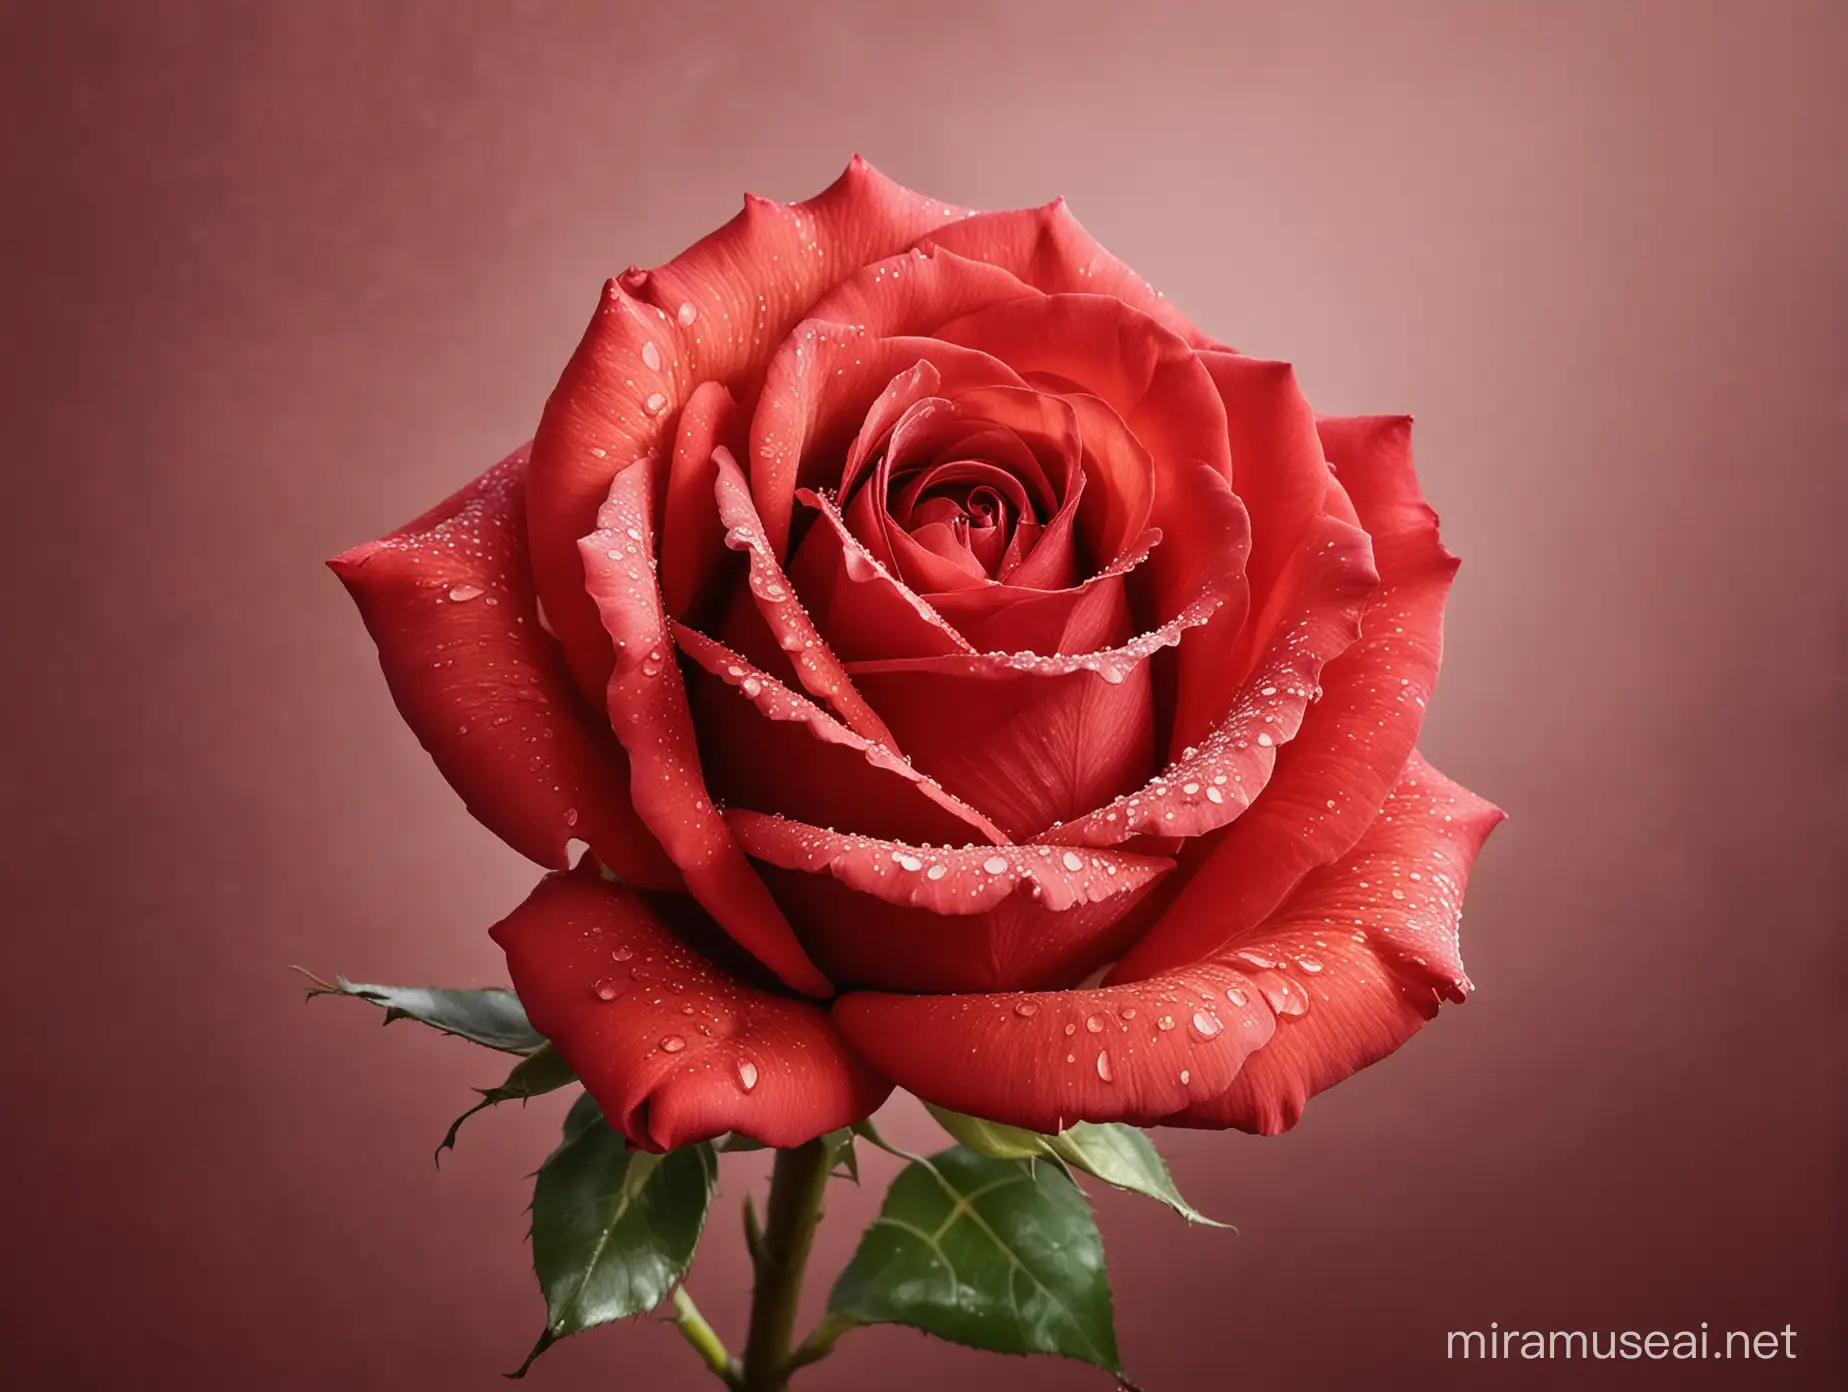 color photo of a captivating, beautiful red rose isolated on a background that accentuates its elegance and allure. The red rose takes center stage, its velvety petals delicately unfurled and exuding a mesmerizing fragrance. Against a contrasting background, the vibrant red hue of the rose stands out, symbolizing love, passion, and beauty. The isolation of the rose creates a sense of focus, allowing its exquisite details to be admired and appreciated. The background could be a soft, muted color that enhances the rose's vibrancy, or a contrasting color that creates a dramatic visual impact. This composition invites viewers to immerse themselves in the timeless beauty of the red rose, to marvel at its intricate structure, and to be captivated by its intoxicating aroma. It is a visual celebration of the enduring symbol of love and romance, conveying emotions that words often fail to express.